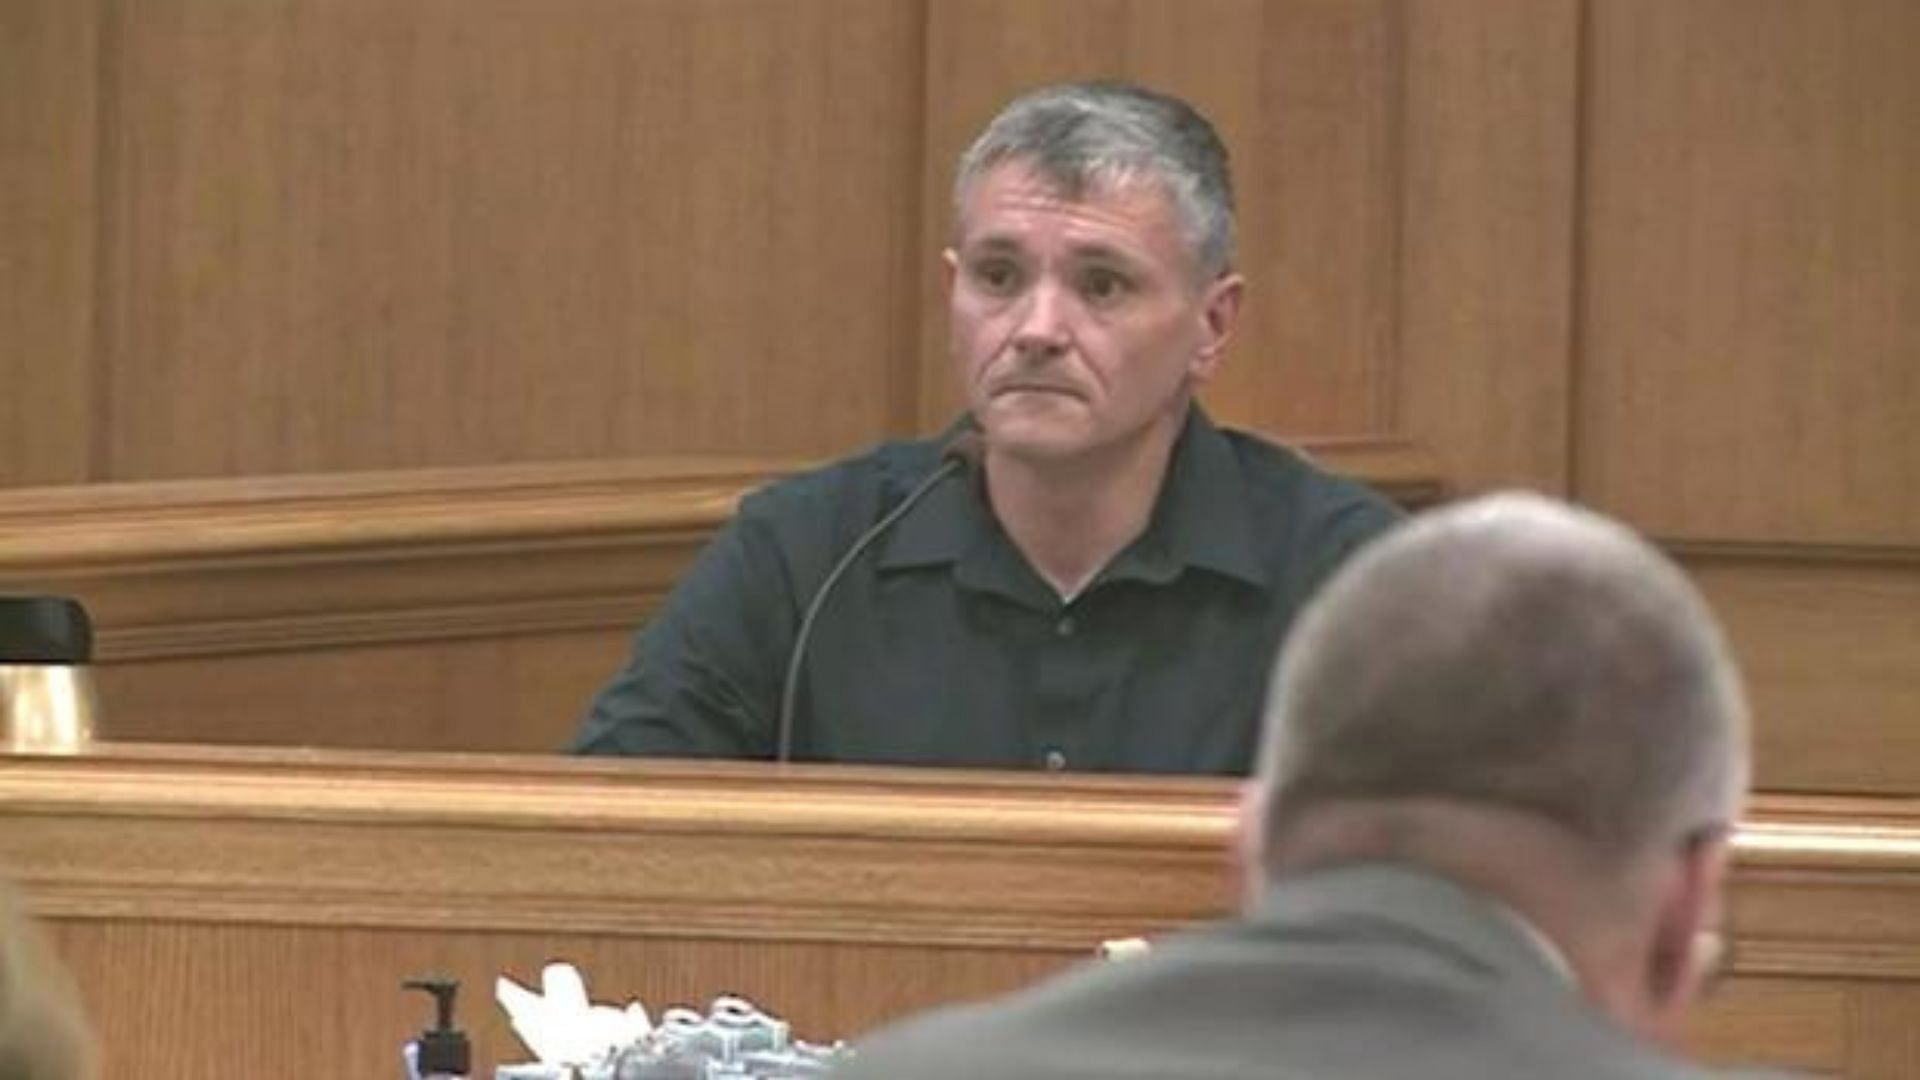 A still of Todd Kendhammer in the courtroom (Via CBS News)